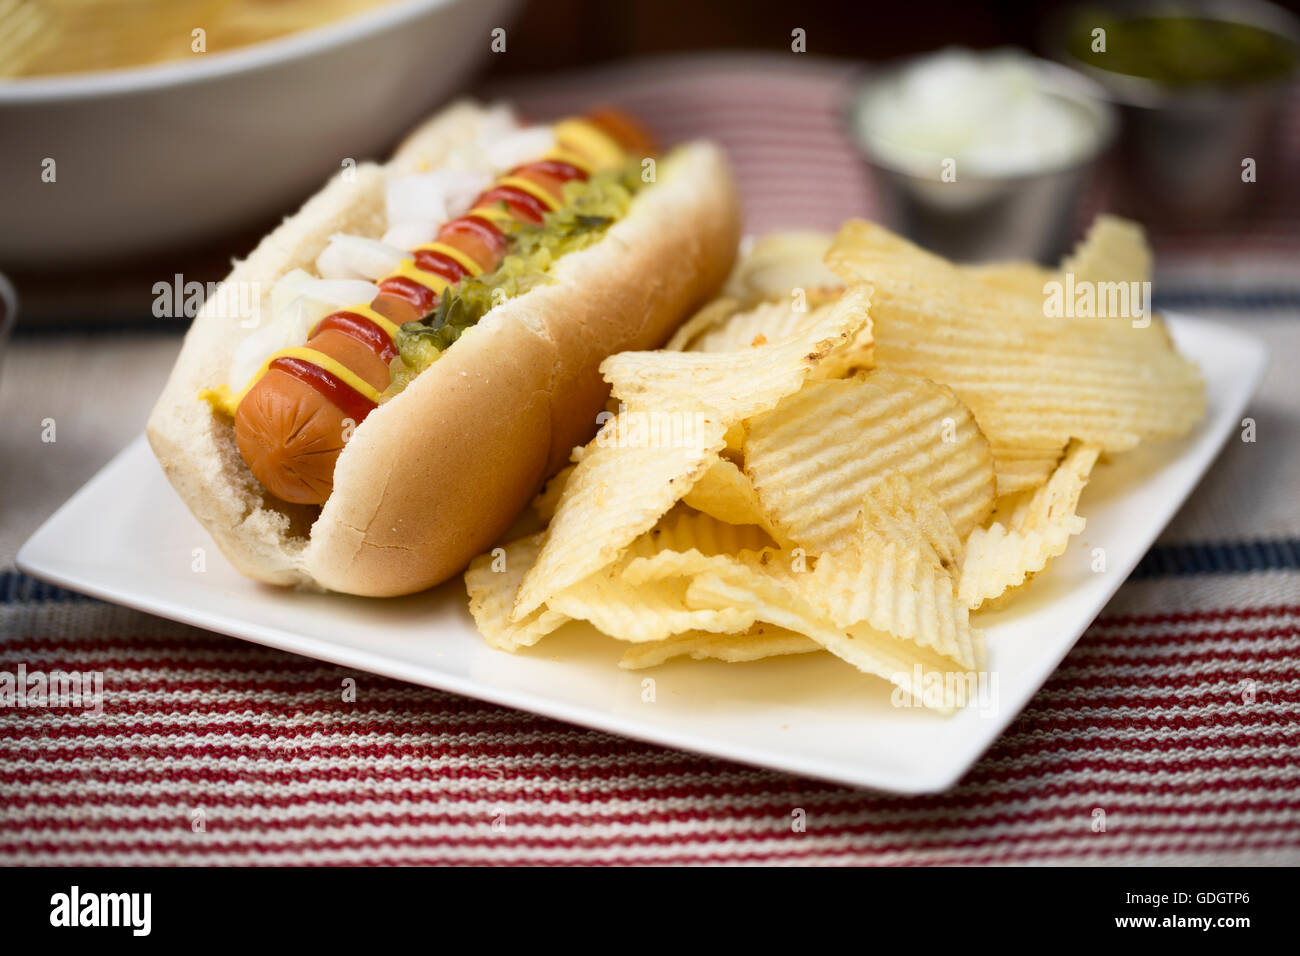 Veggie hot dog topped with mustard, ketchup, onions and relish, served with potato crisps (chips). Stock Photo